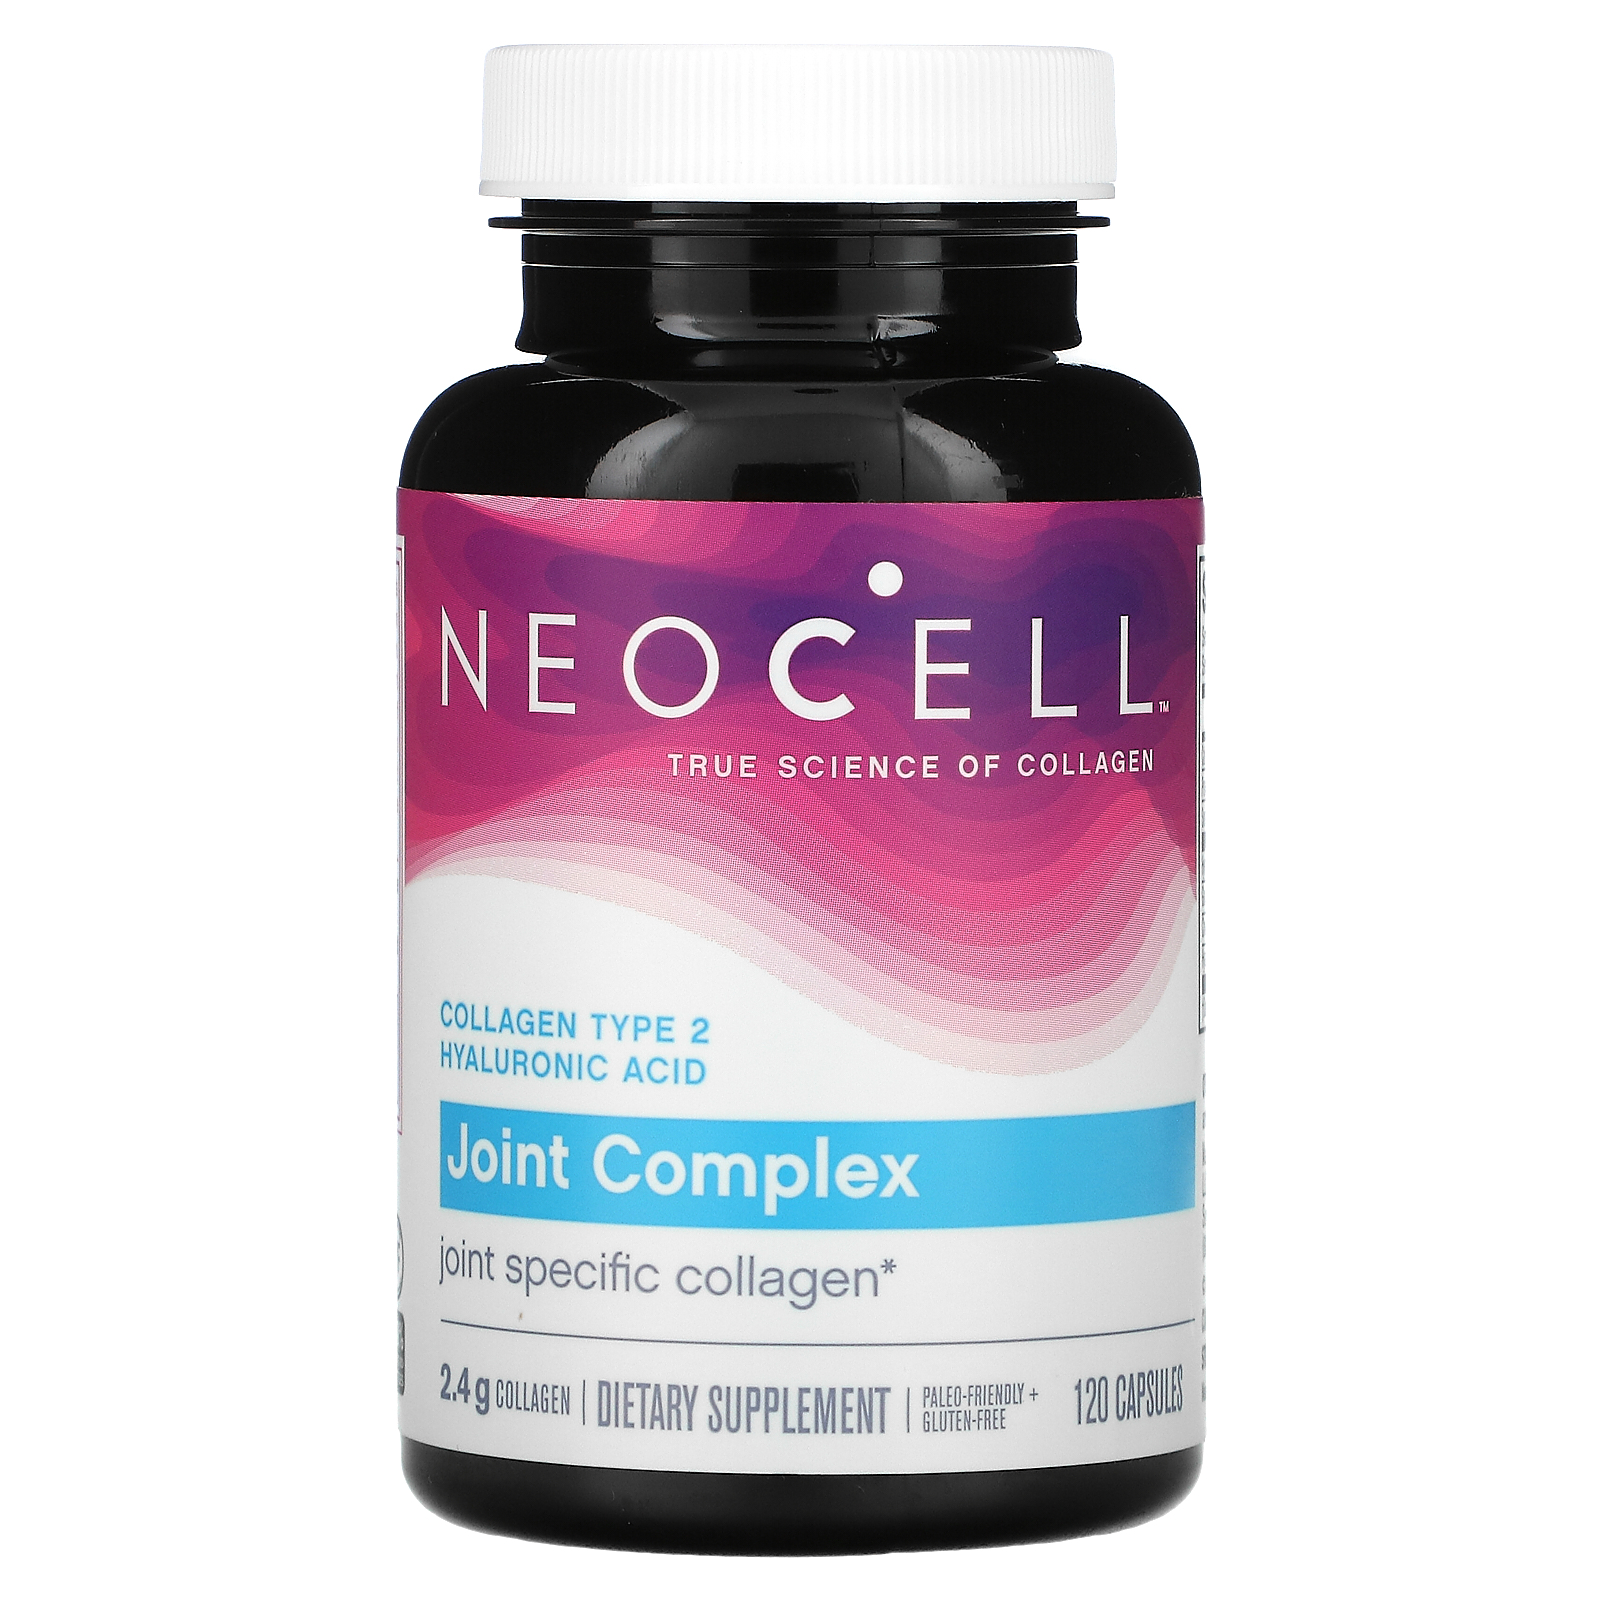 NeoCell Collagen 2 Joint Complex 120 Capsules